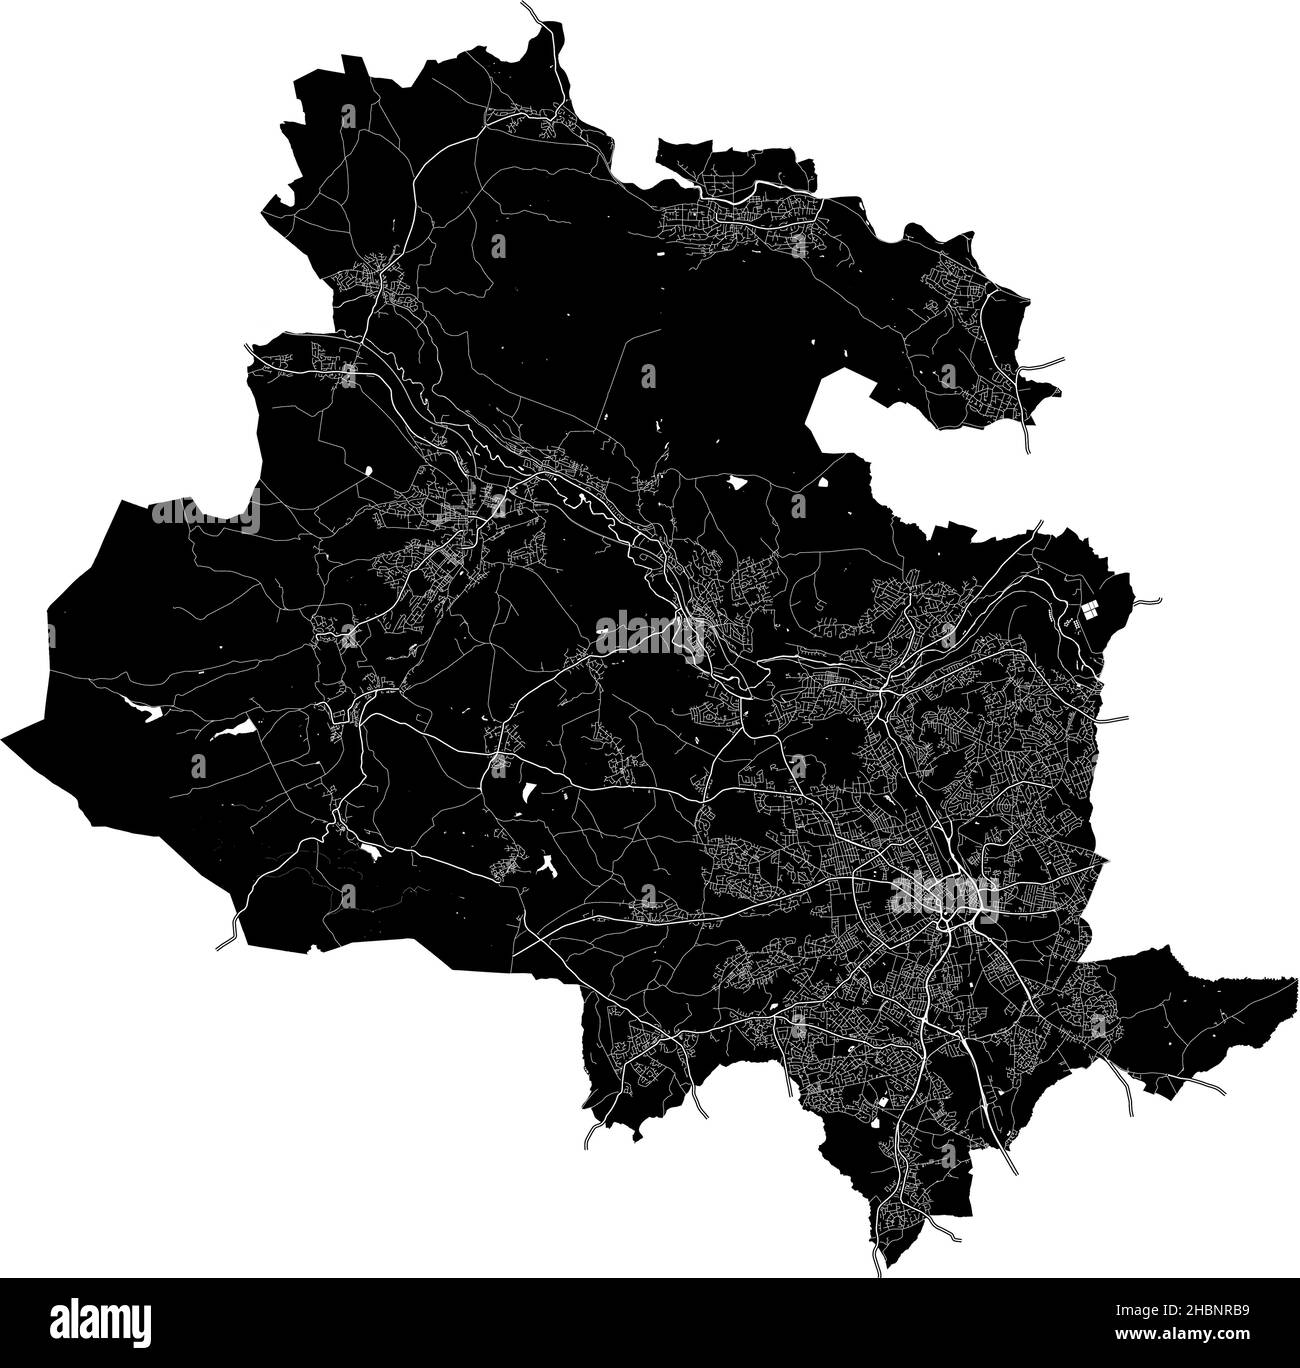 Bradford, England, high resolution vector map with city boundaries, and editable paths. The city map was drawn with white areas and lines for main roa Stock Vector